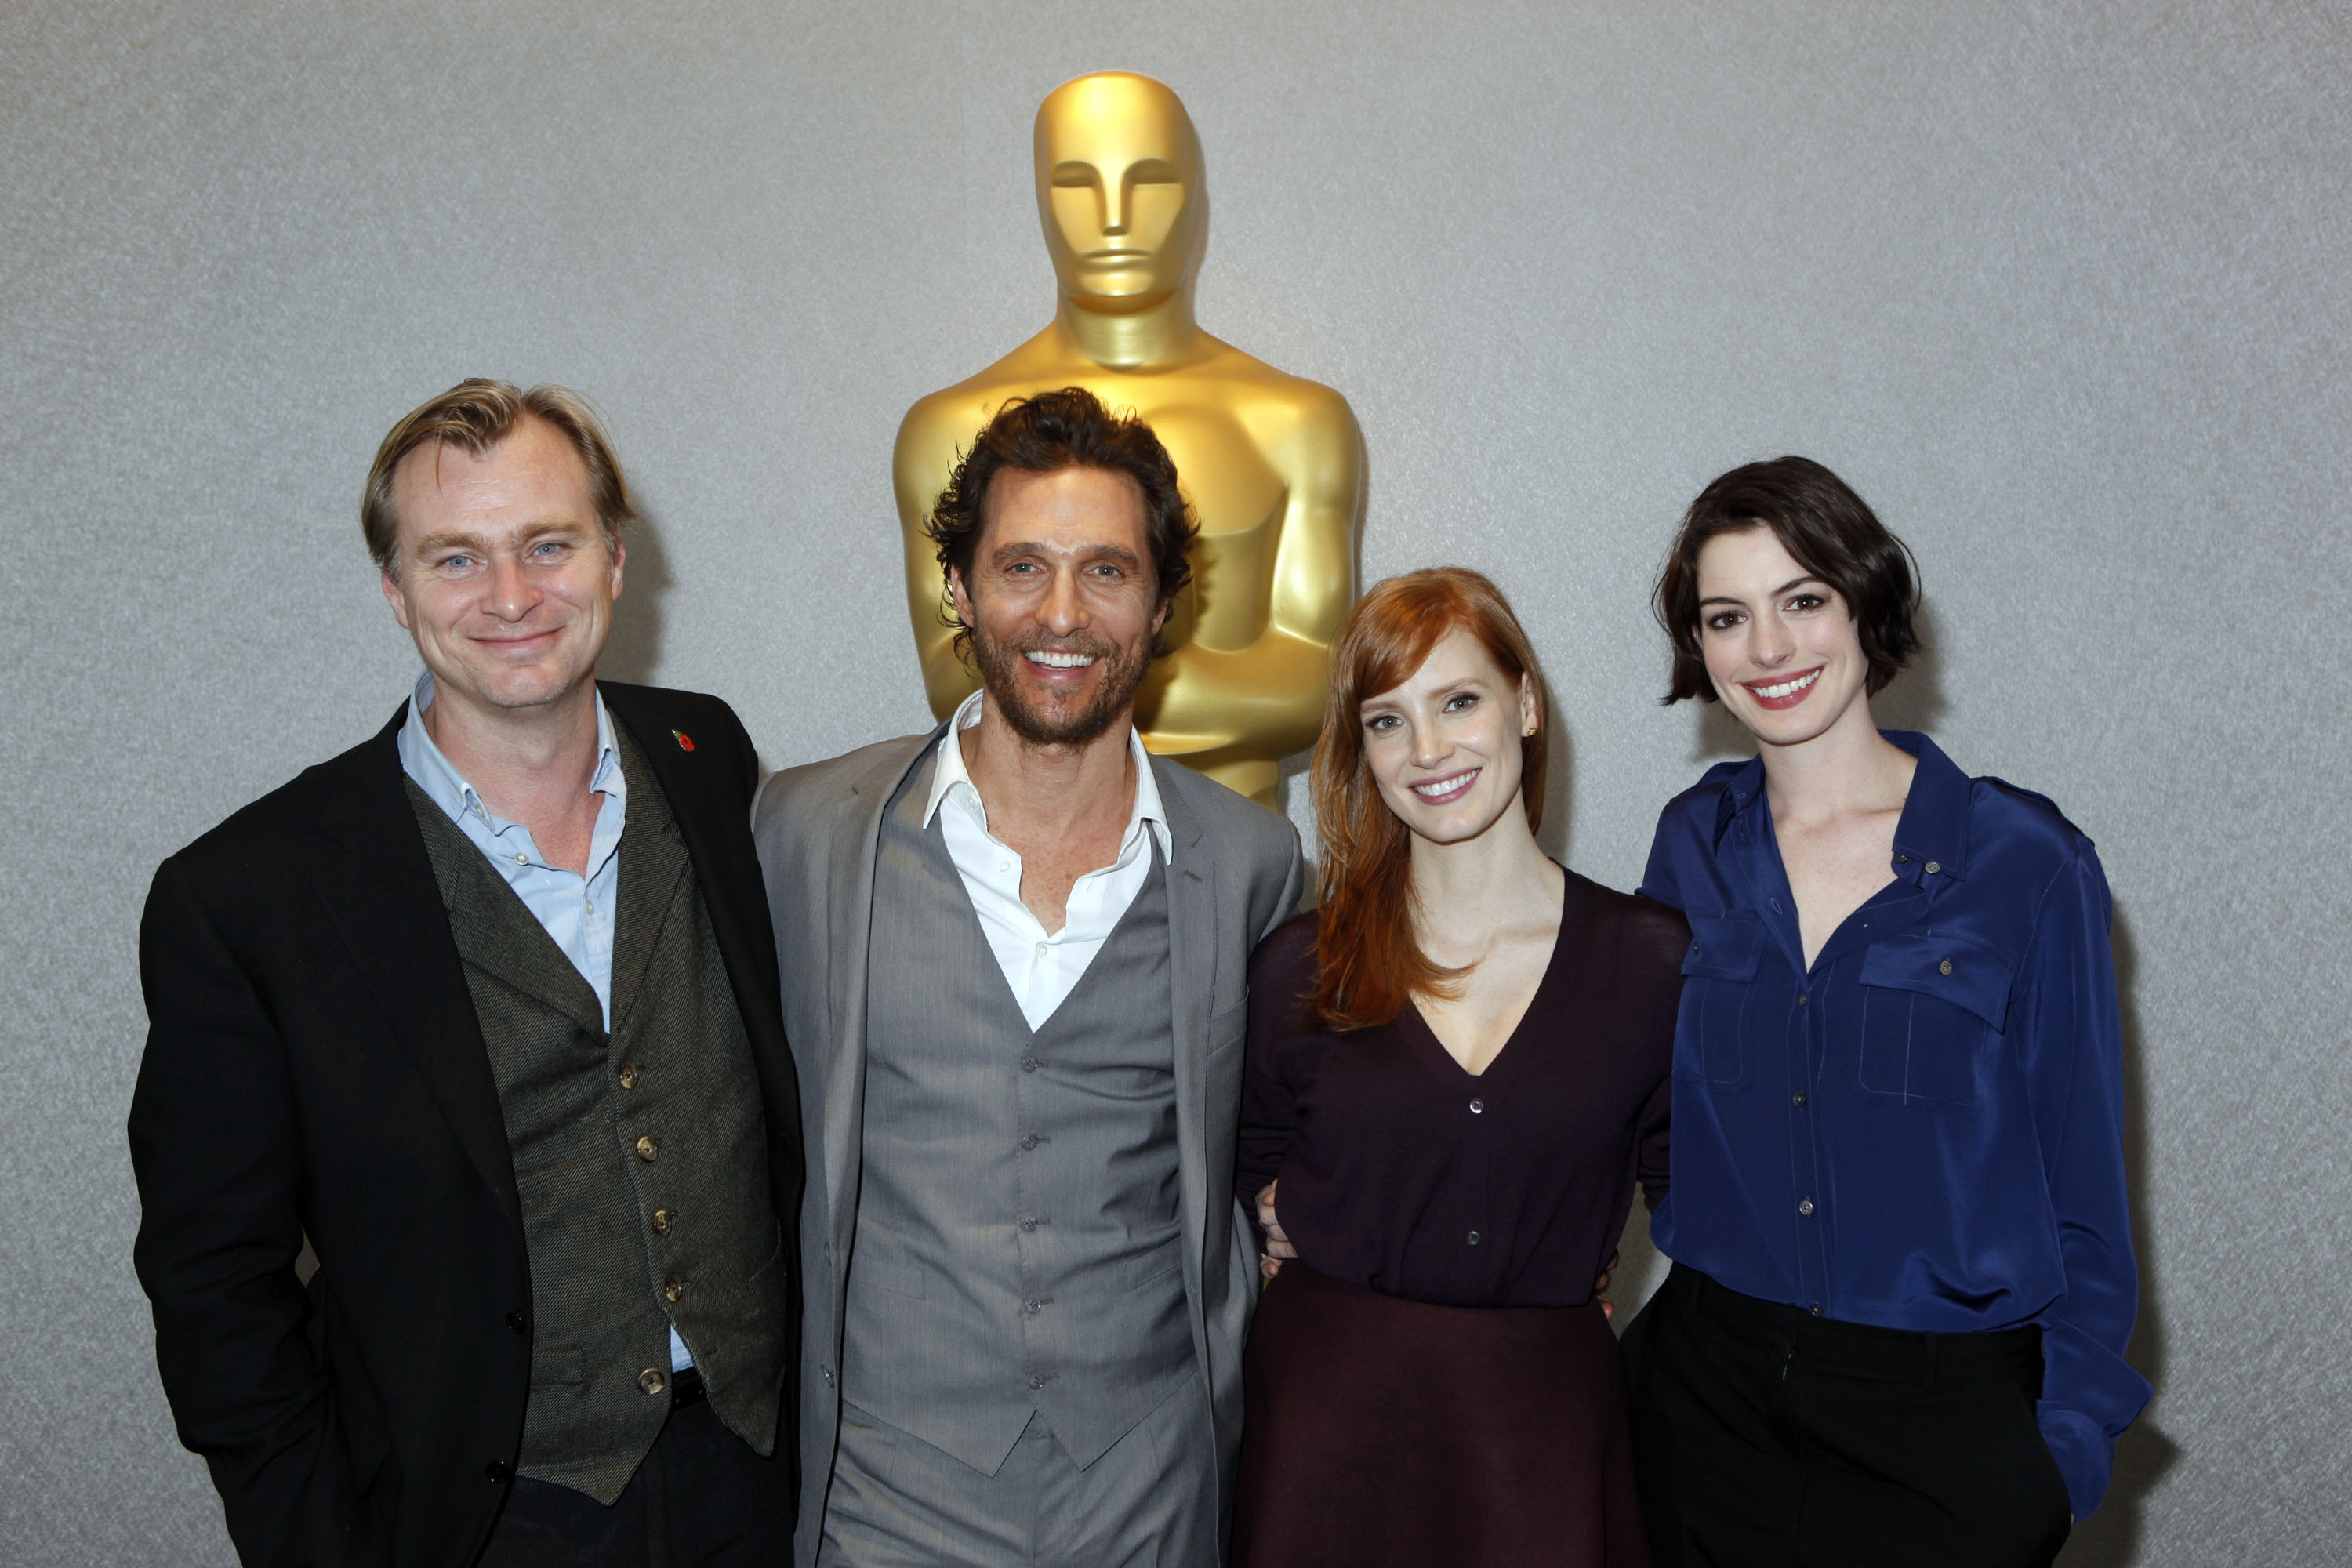 Christopher Nolan, Matthew McConaughey, Jessica Chastain, and Anne Hathaway at the official Academy members' "Interstellar" screening on November 4, 2014, in New York City. | Source: Getty Images